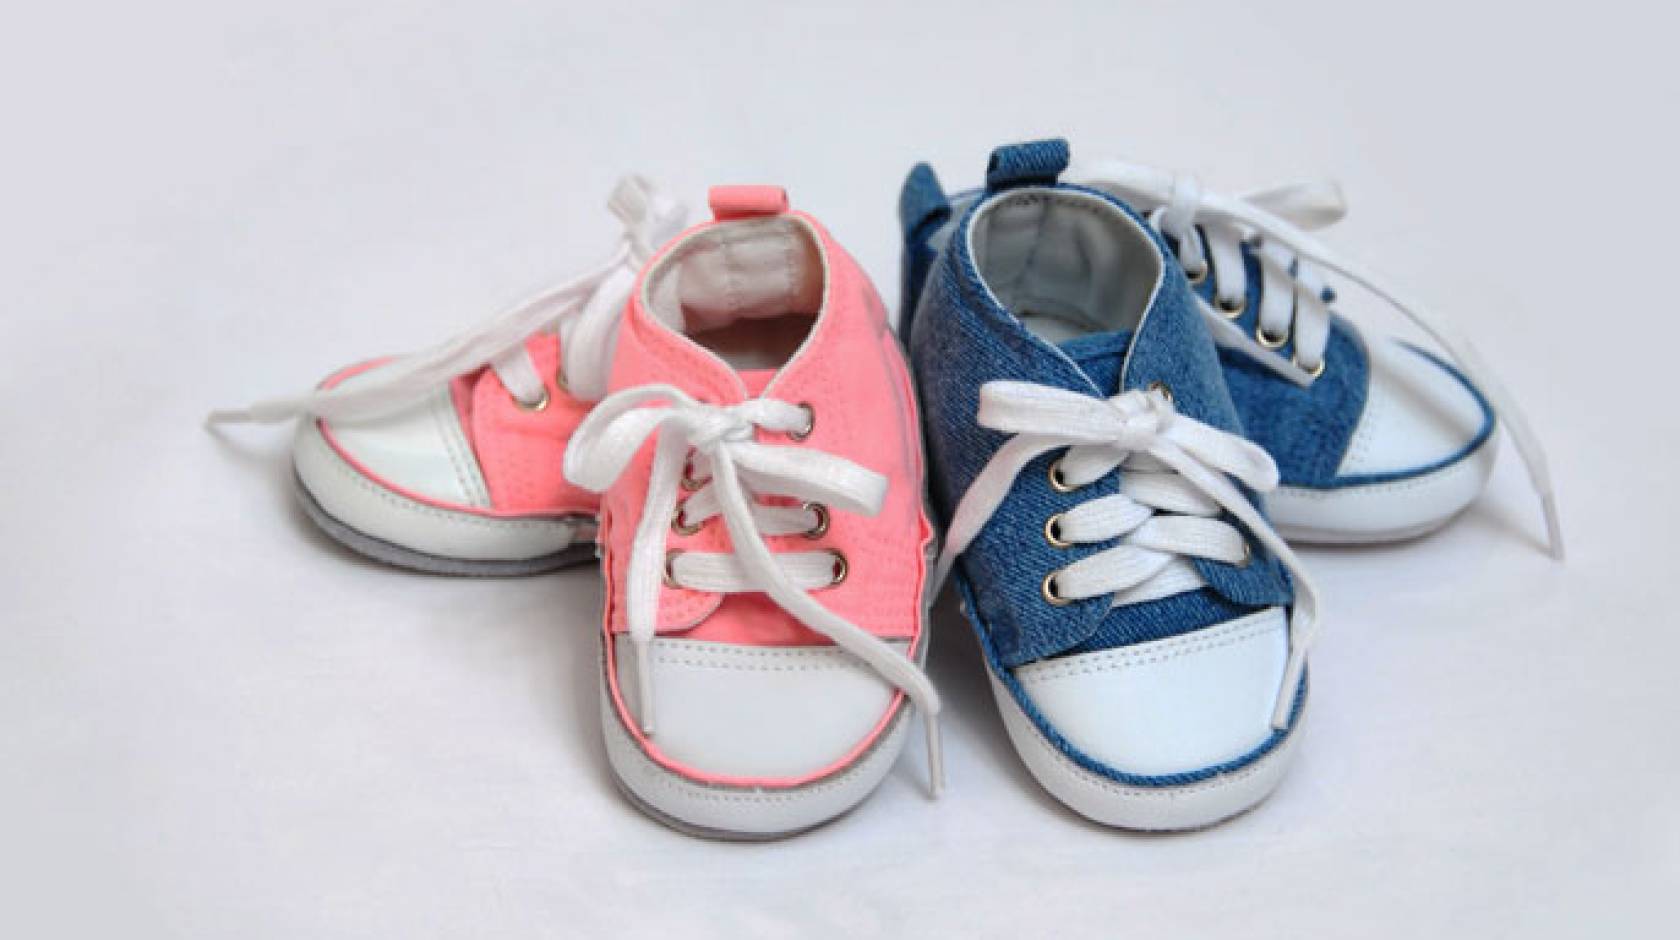 Baby girl and baby boy shoes next to each other